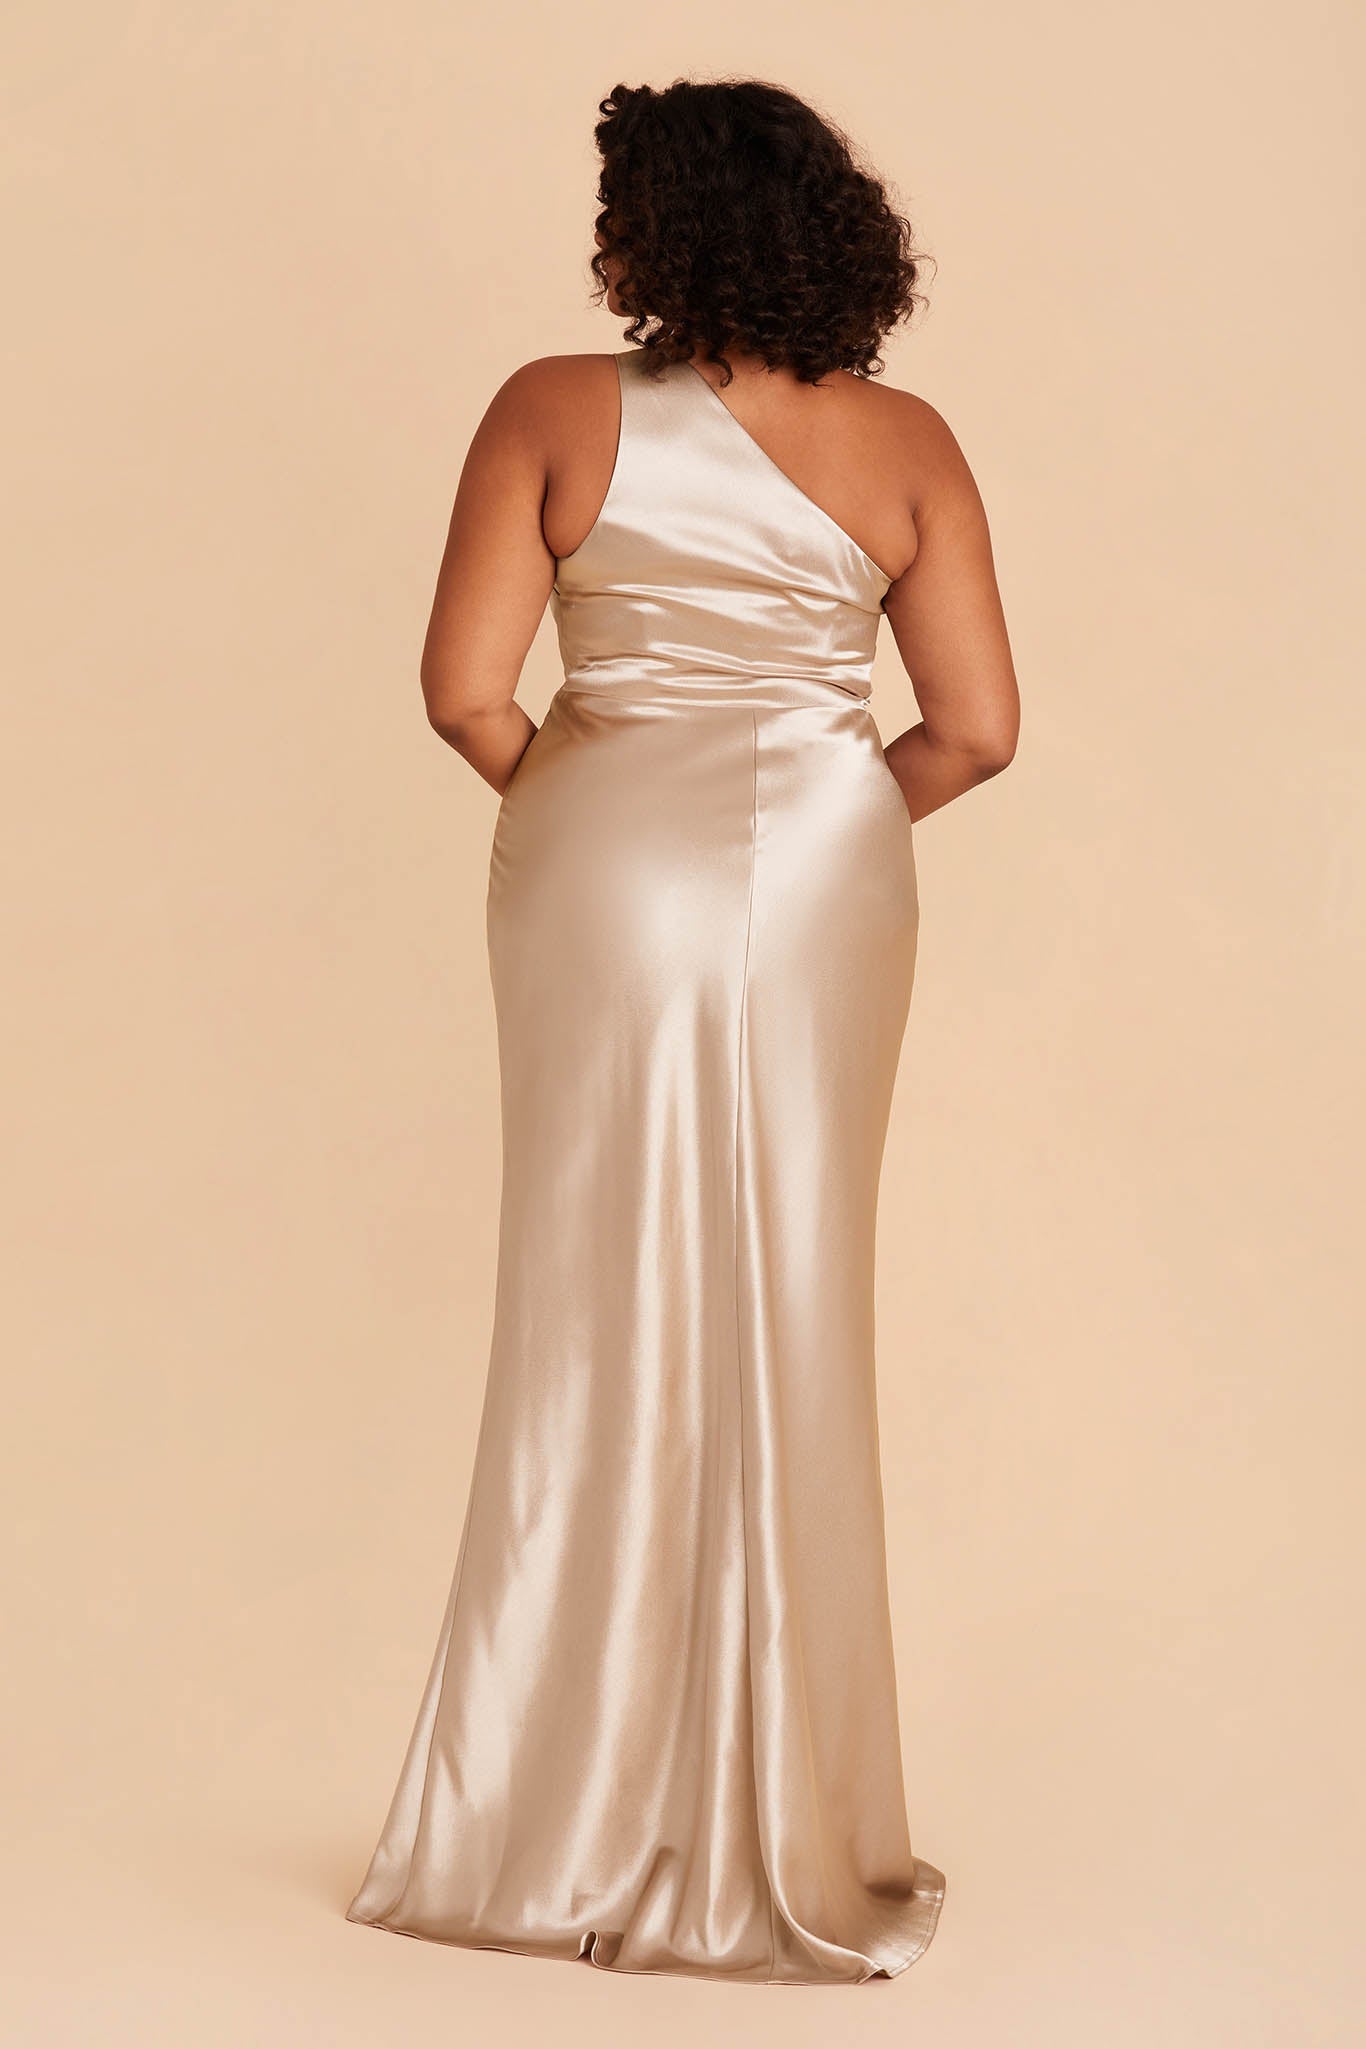 Back view of the Kira Dress Curve in neutral champagne satin shows a full-figured model with a medium skin tone. The back of the dress has a smooth fit across the one-shoulder bodice and waist that attaches to a mermaid-style skirt.  